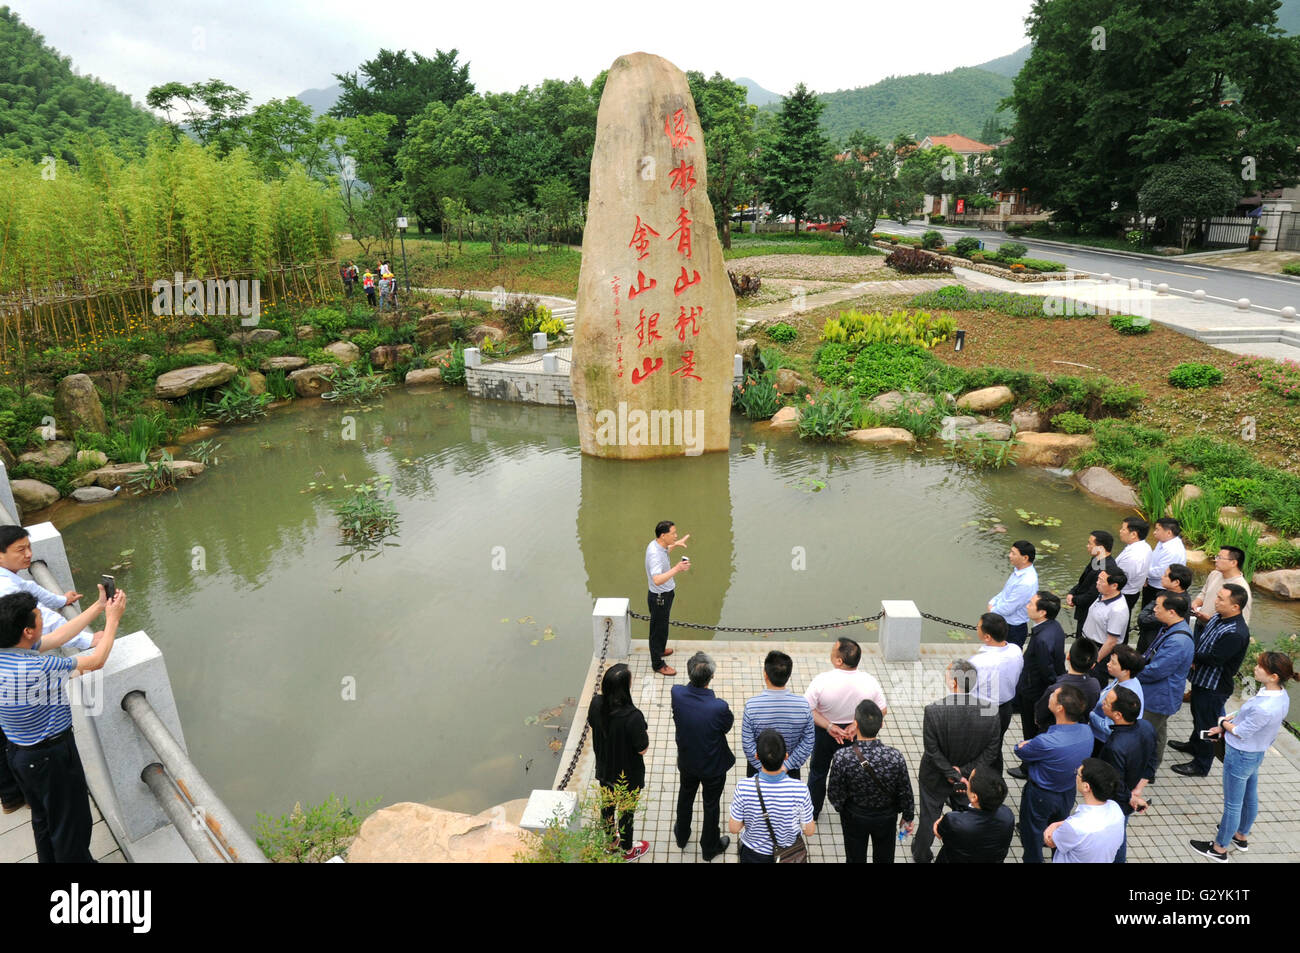 (160605) -- ANJI, June 5, 2016 (Xinhua) -- Tourists visit the environment-friendly Yucun Village of Anji County, east China's Zhejiang Province, June 4, 2016. Anji is known for its pleasant environment with flourishing bamboo plantations and many scenes from the famous movie 'Crouching Tiger, Hidden Dragon' were shot here. The county persists in green, low-carbon development, and strives to protect environment as well as to develop local economy. June 5 is observed as World Environment Day every year, and this year's theme issued by China's Ministry of Environment Protection is 'improving the Stock Photo